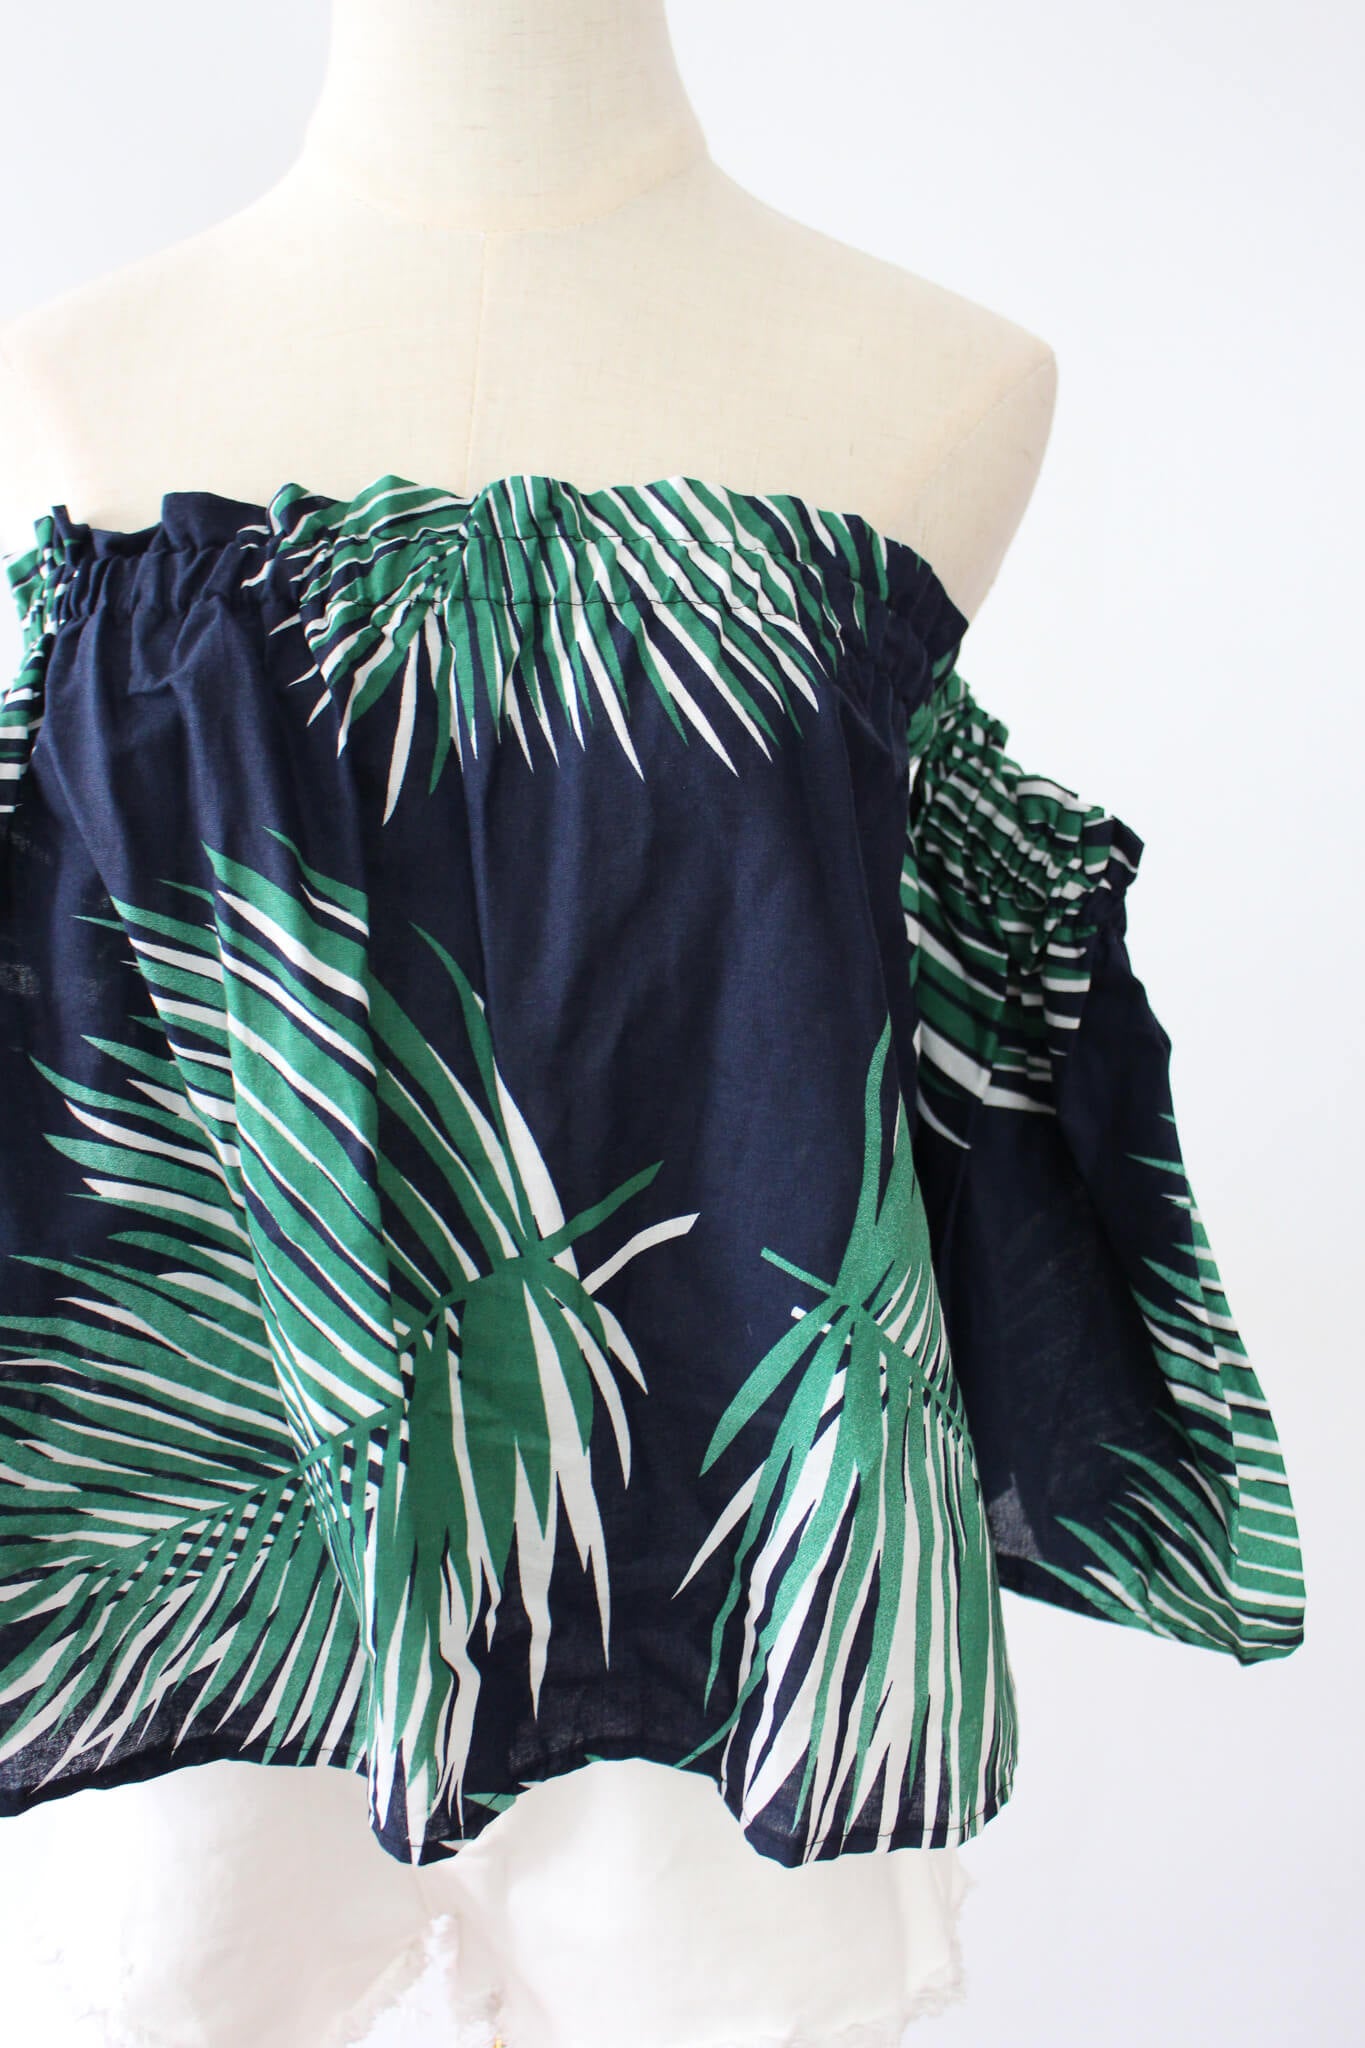 Navy blue off-shoulder top with palm leaf print, perfect for summer